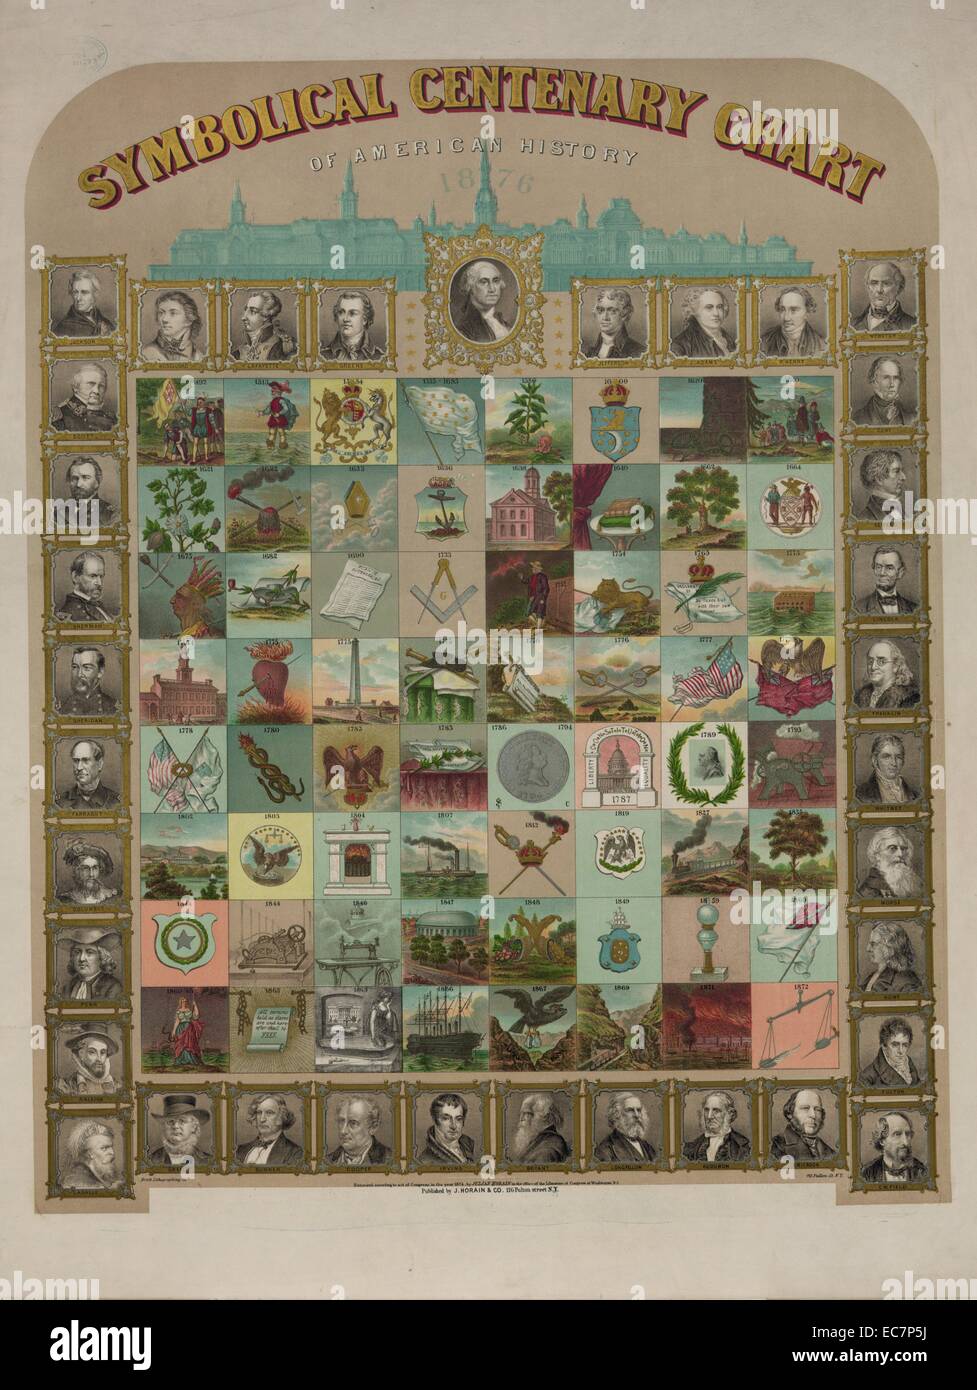 Symbolical centenary chart of American history. Print shows a large chart representing events in American history, presented chronologically from 1492 to 1872, and portraits of explorers, presidents, legislators, poets, journalists, generals, and other notable figures. Stock Photo